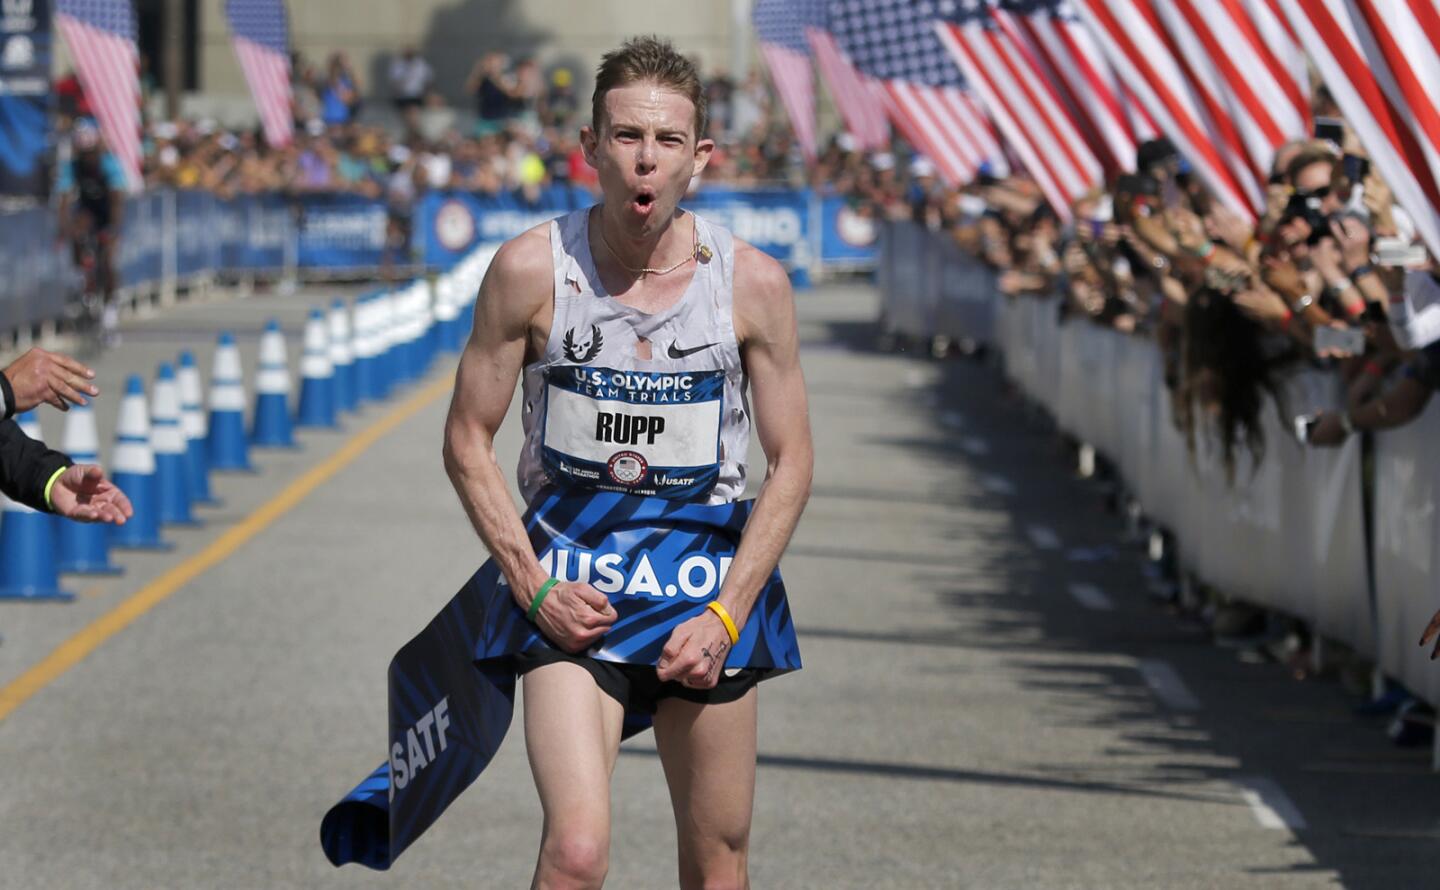 Galen Rupp of Portland, Ore., celebrates his victory after crossing the finish line in the U.S. Olympic men's marathon trial on Saturday in downtown Los Angeles.